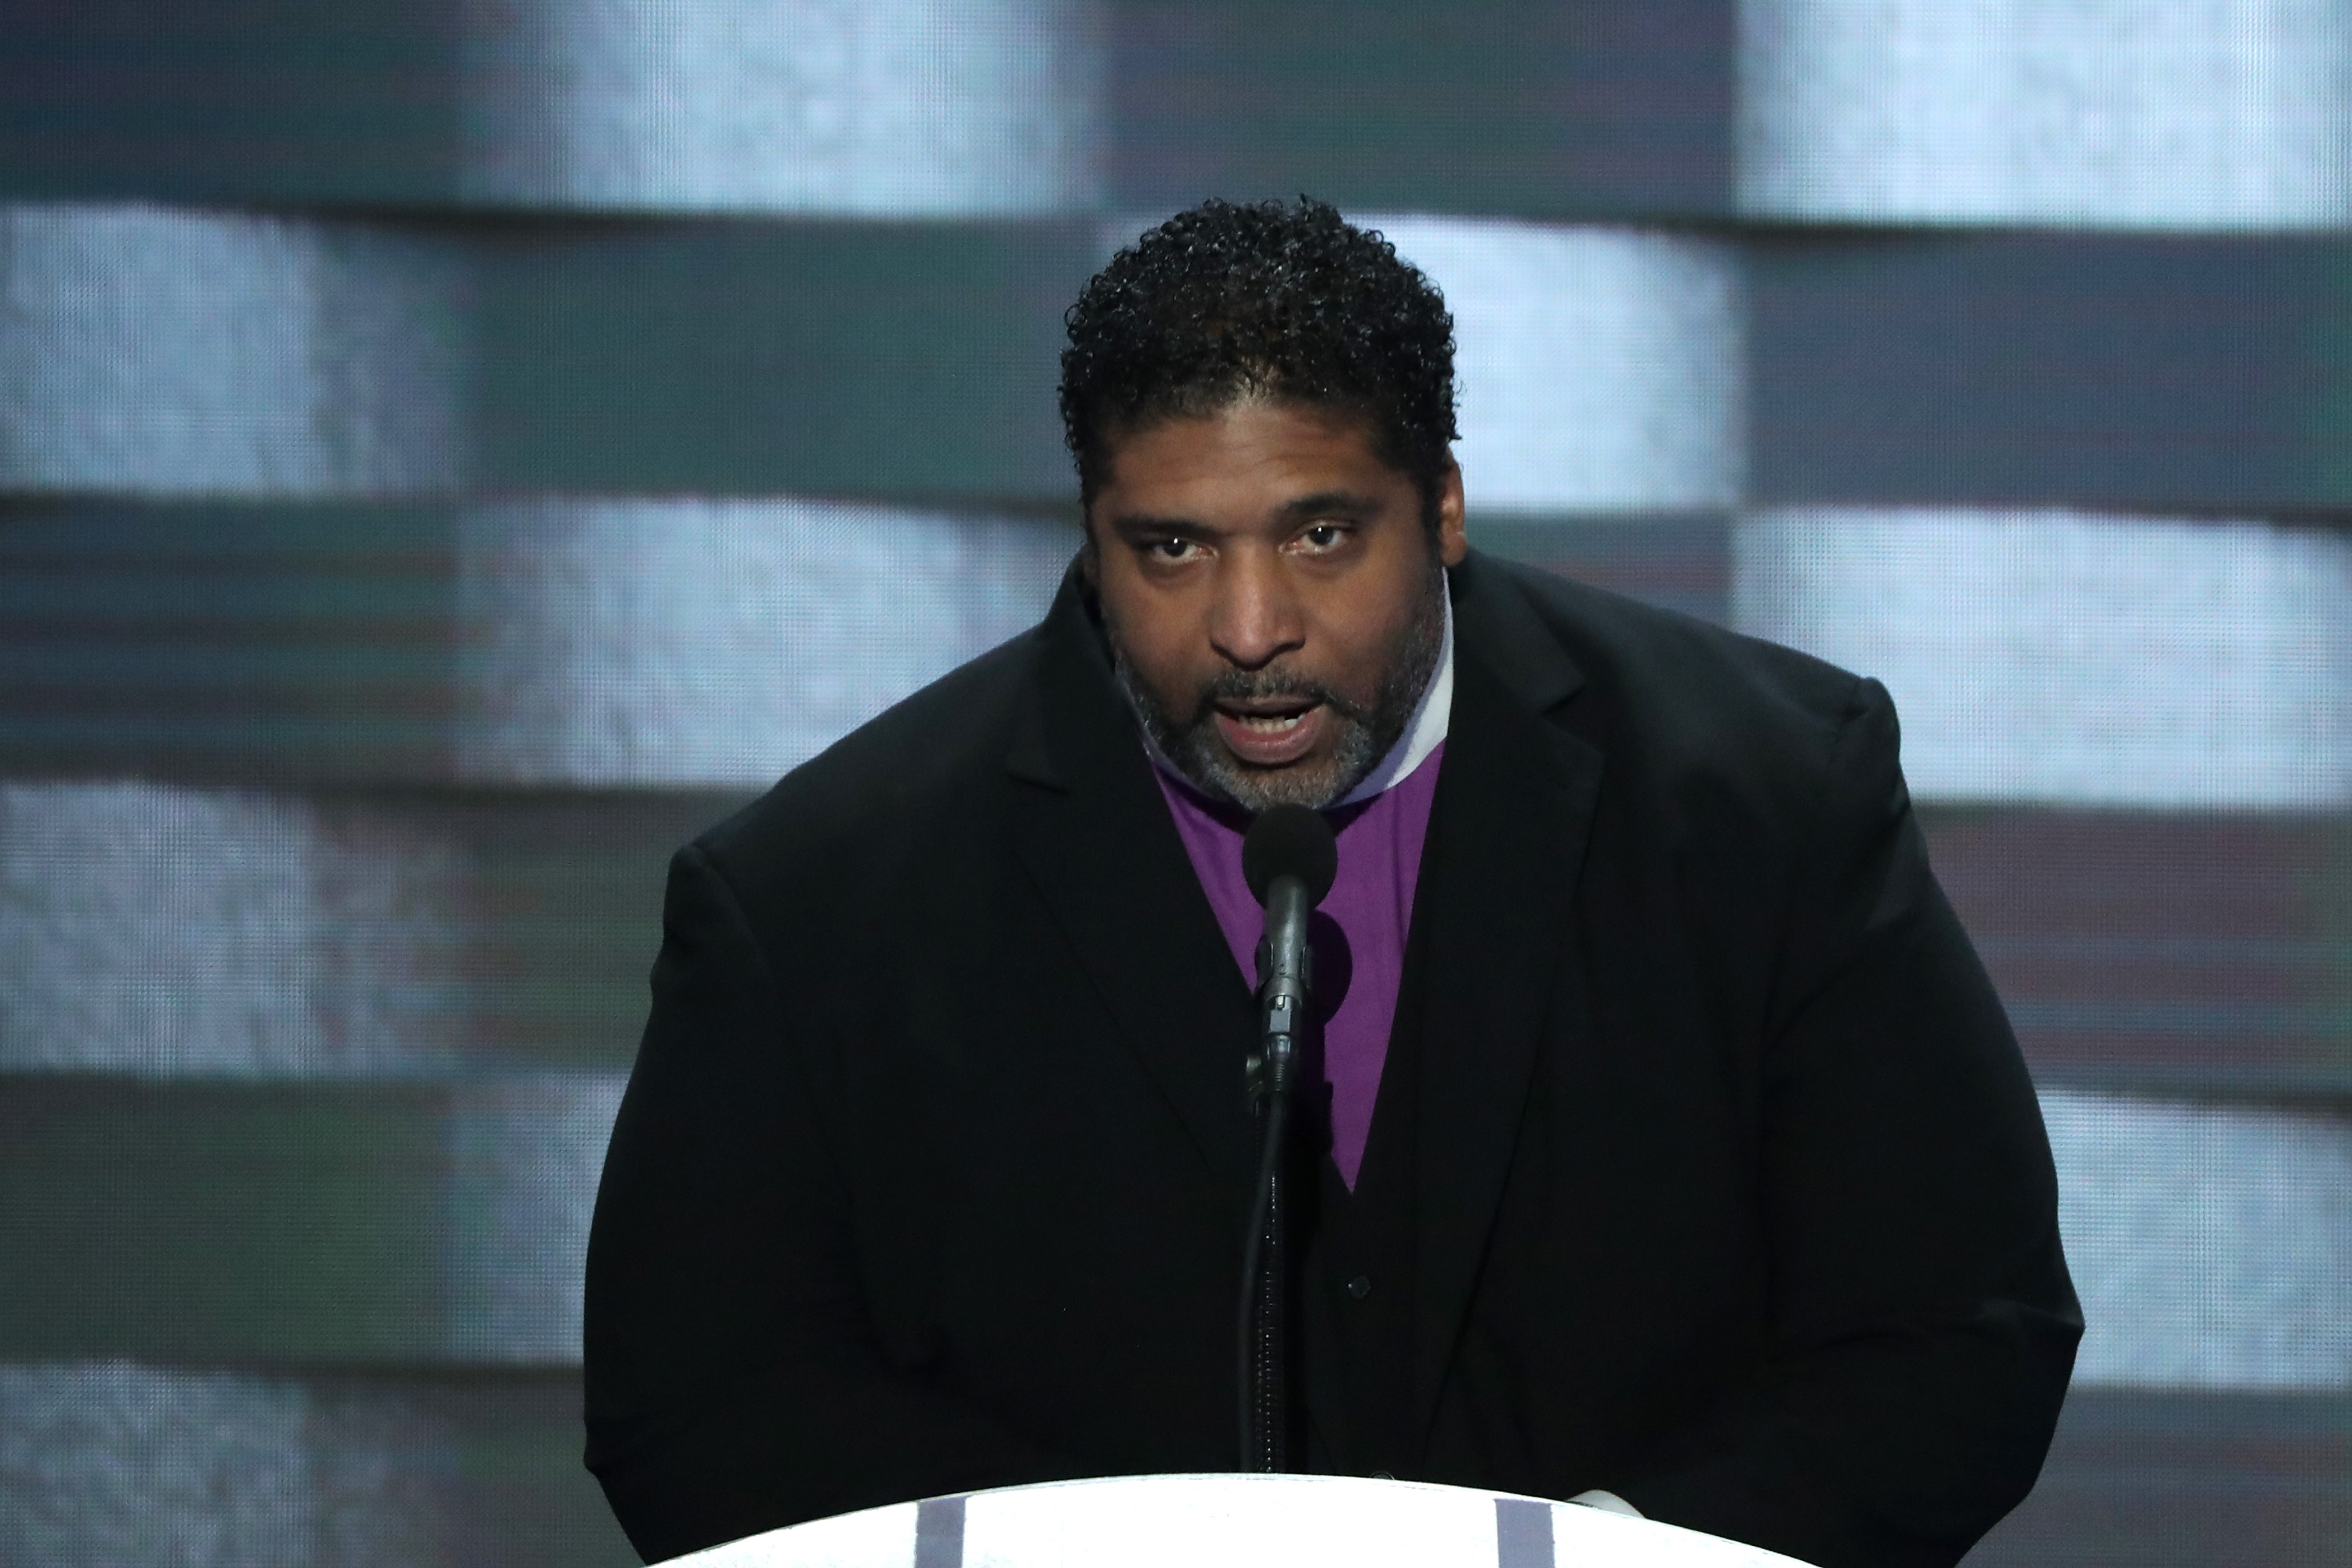 Reverend William Barber delivers remarks on the fourth day of the Democratic National Convention at the Wells Fargo Center in Philadelphia on July 28, 2016.